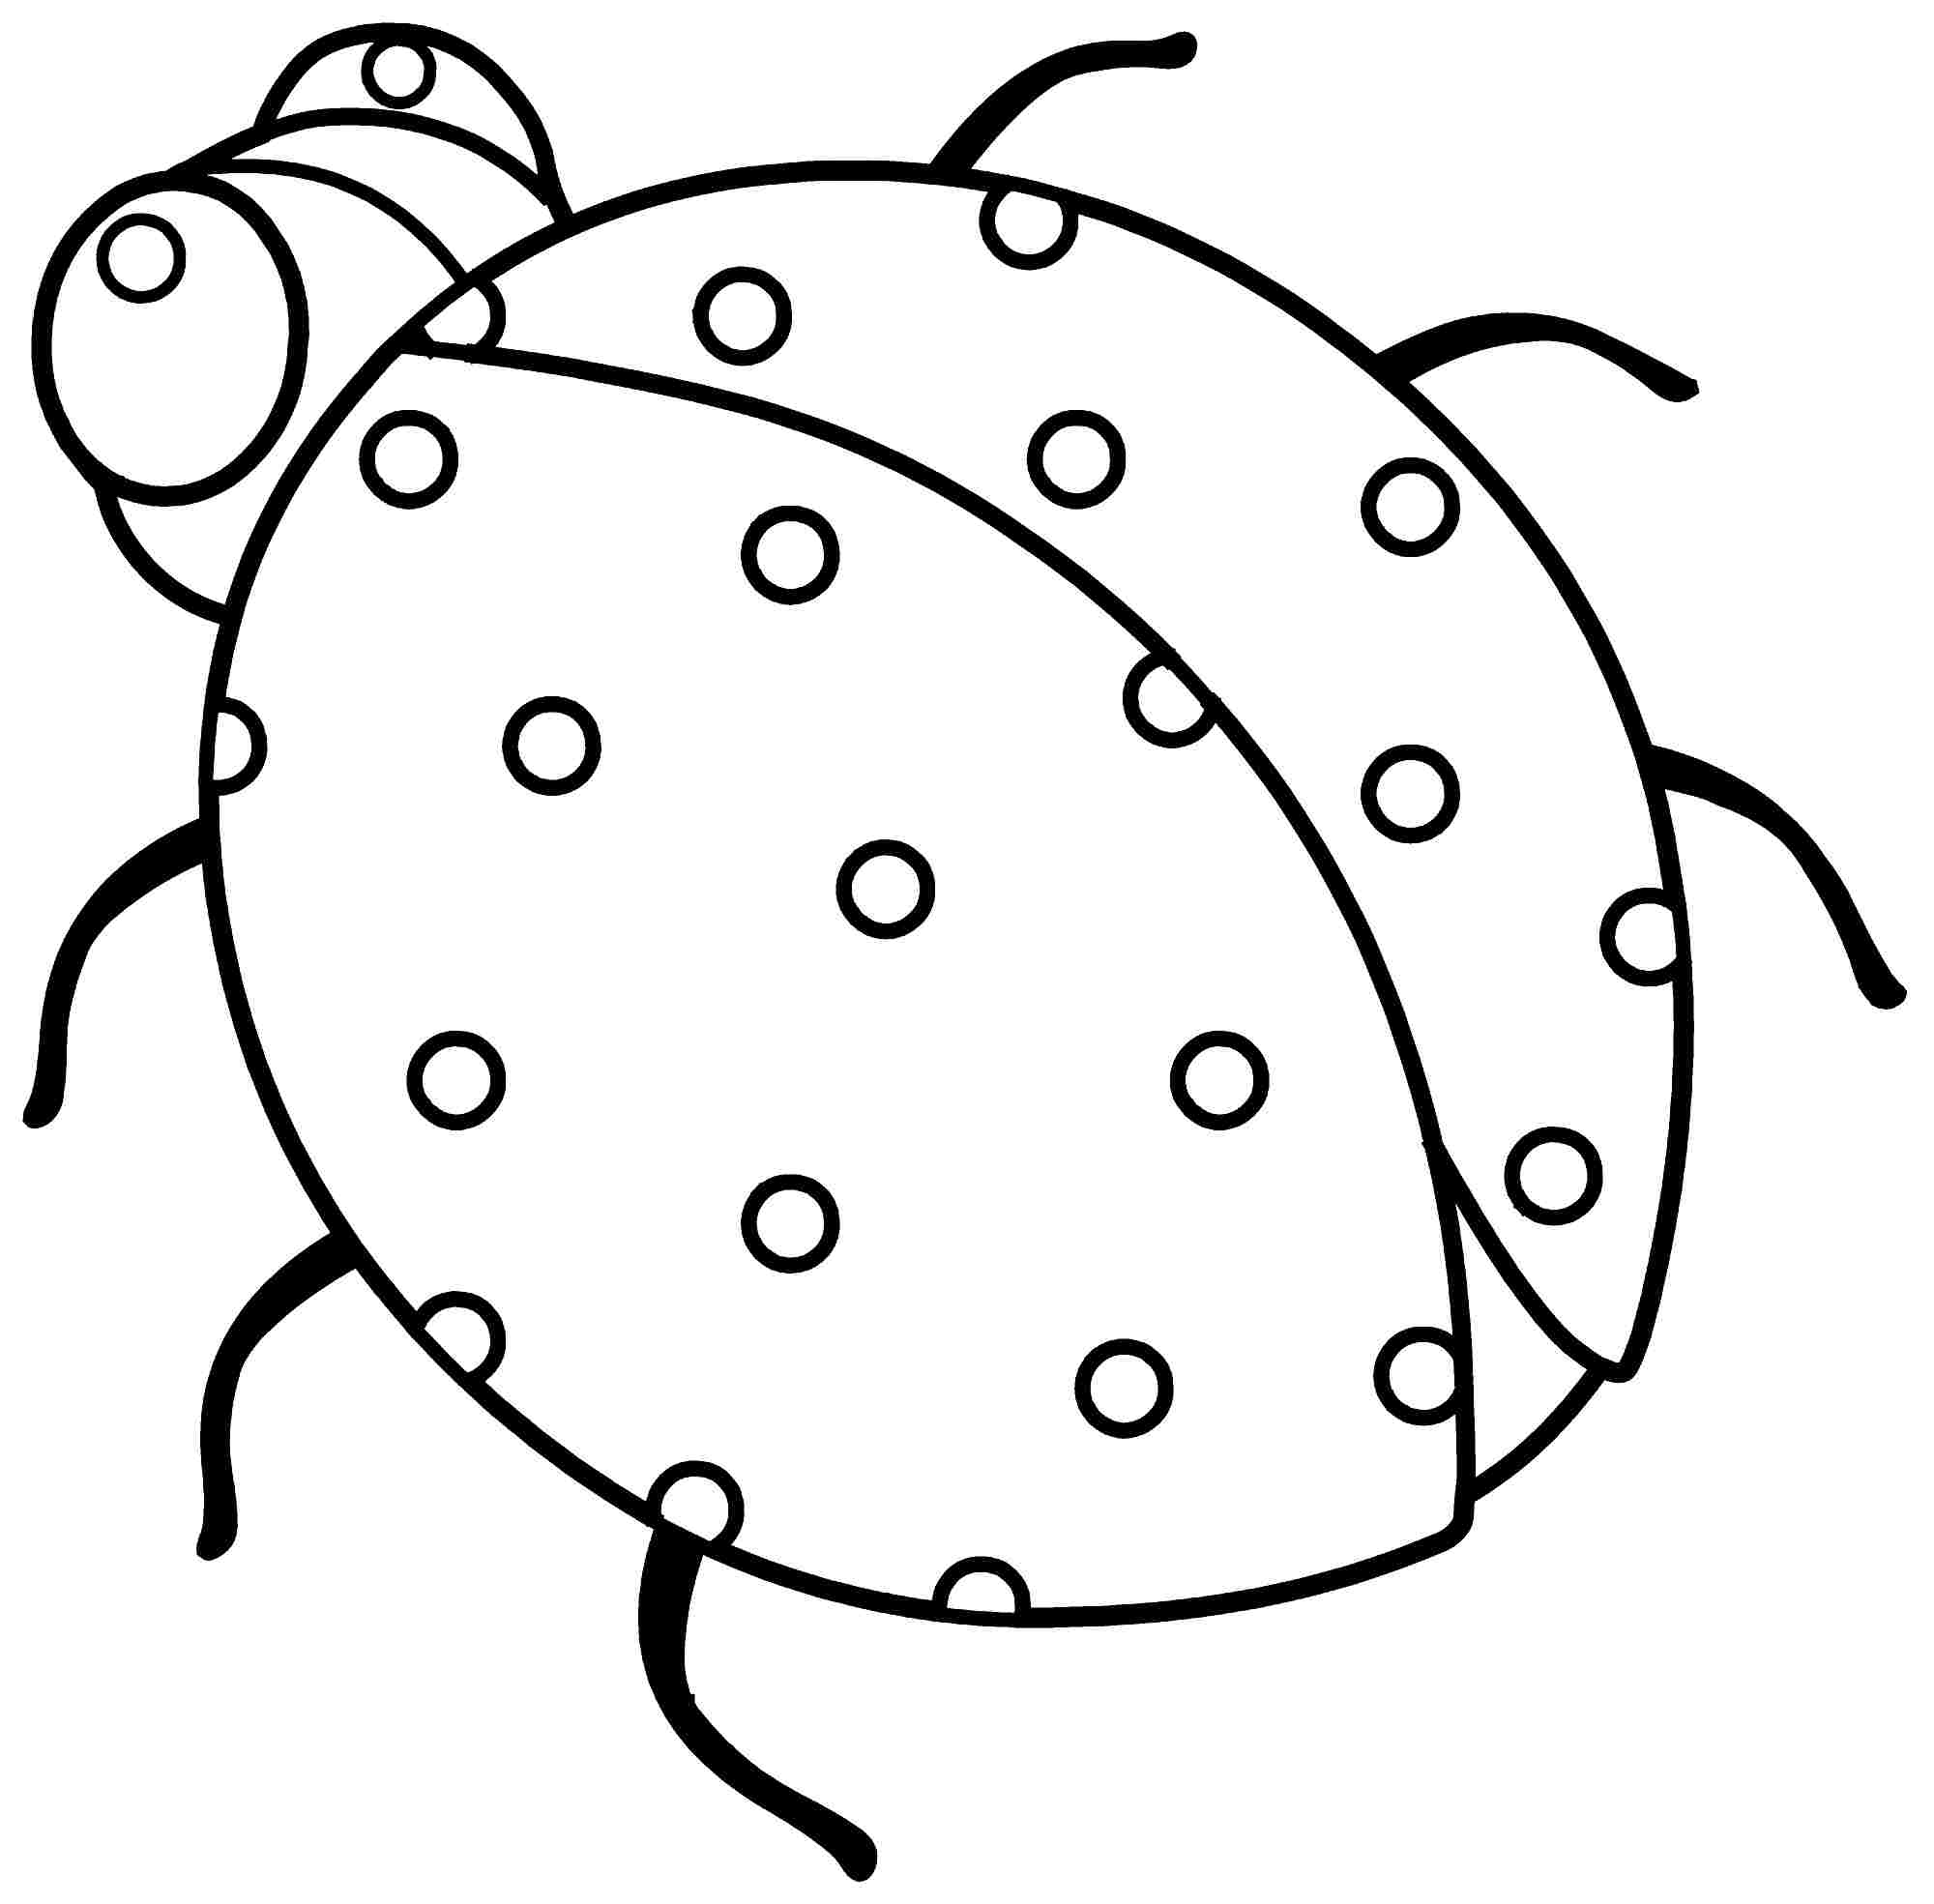 Coloring page: Bettle (Animals) #3422 - Free Printable Coloring Pages